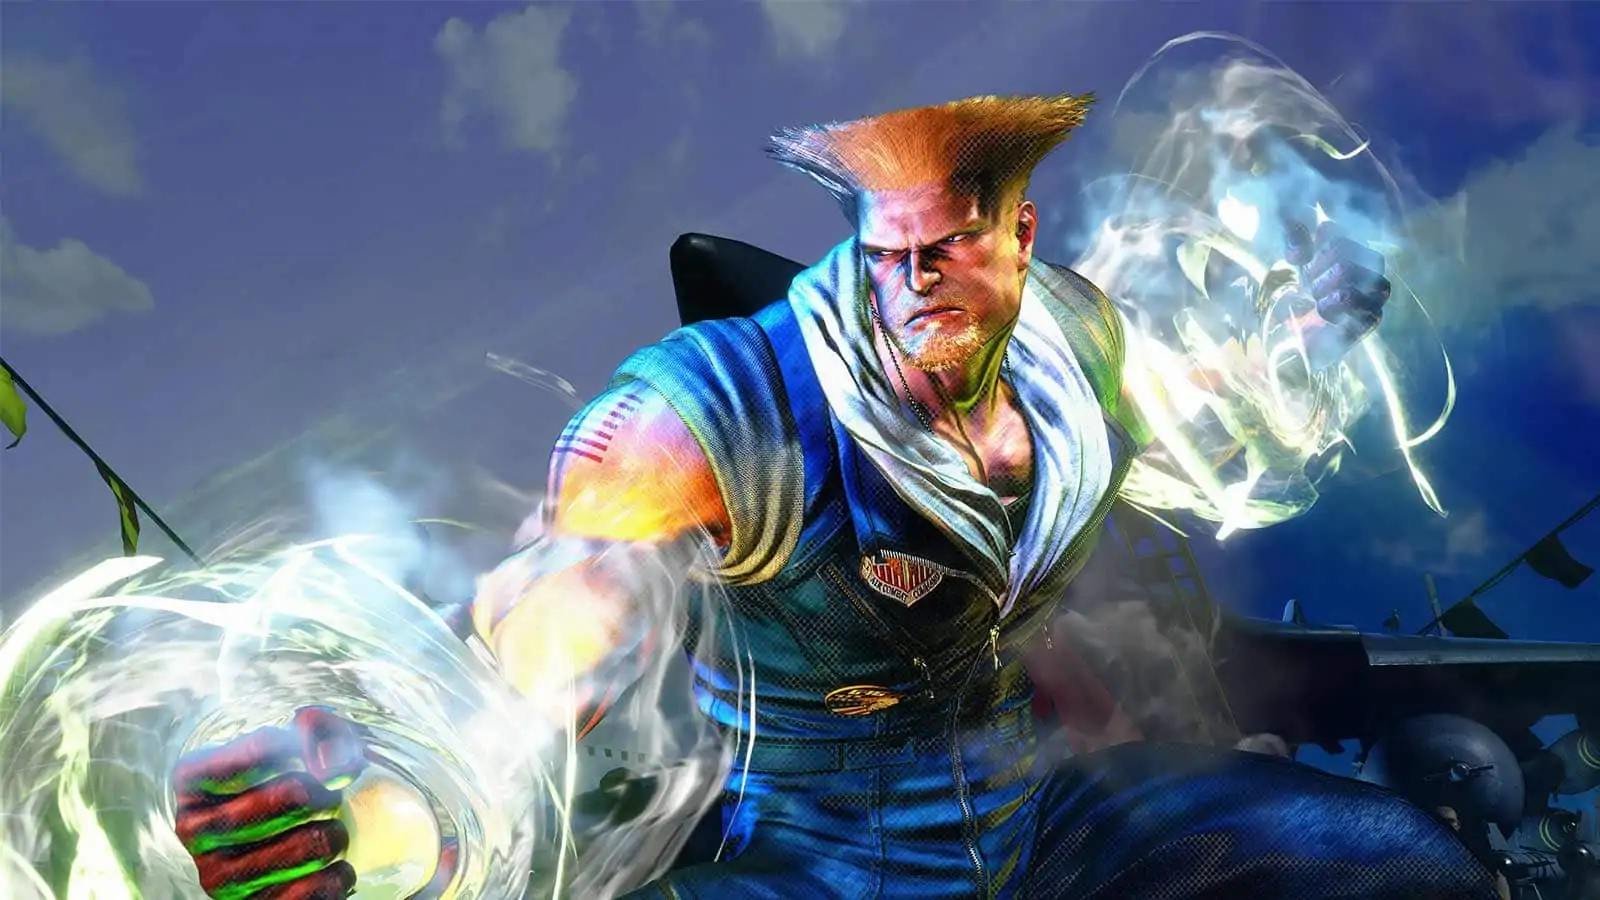 tragic on X: Here are more advanced Guile combos from the SF6